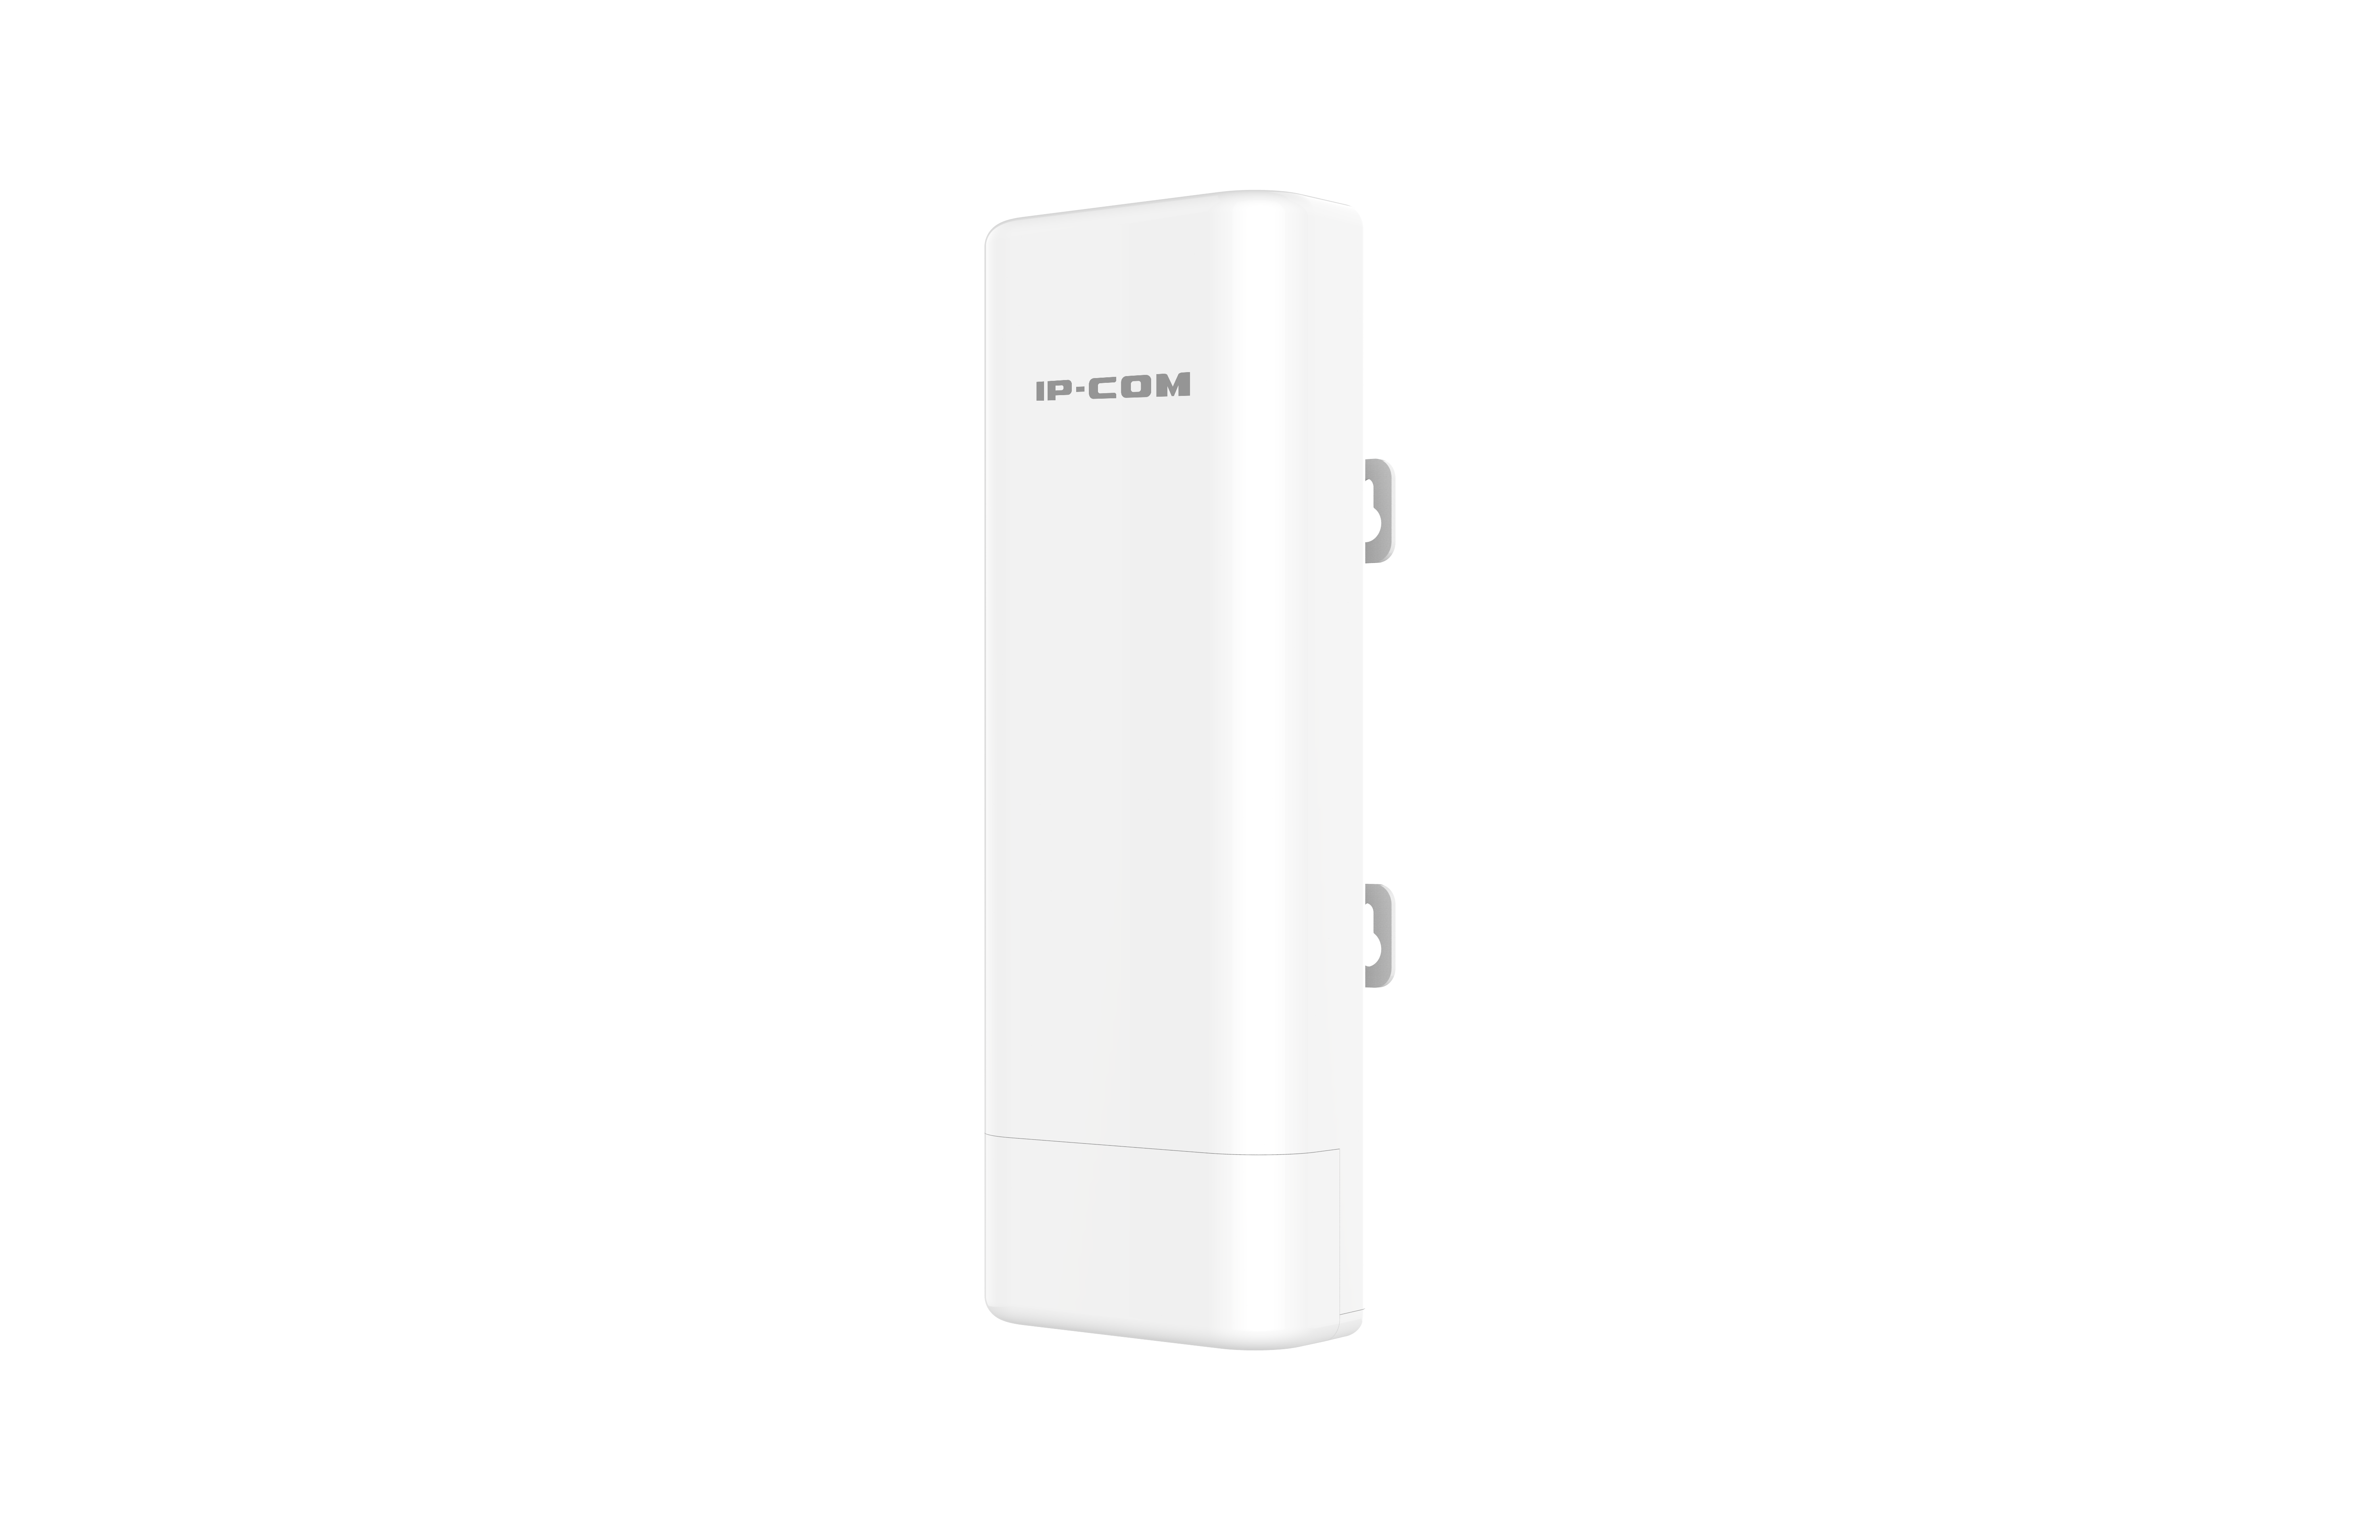 IP-COM 5GHz OUTDOOR CPE 16dBi DIRECTIONAL ANTENNA AUTO BRIDGING 1 x ETHERNET IP65 867Mbps UPTO 10KM POLE MOUNTED 24V PASSIVE POE WHITE 12VDC